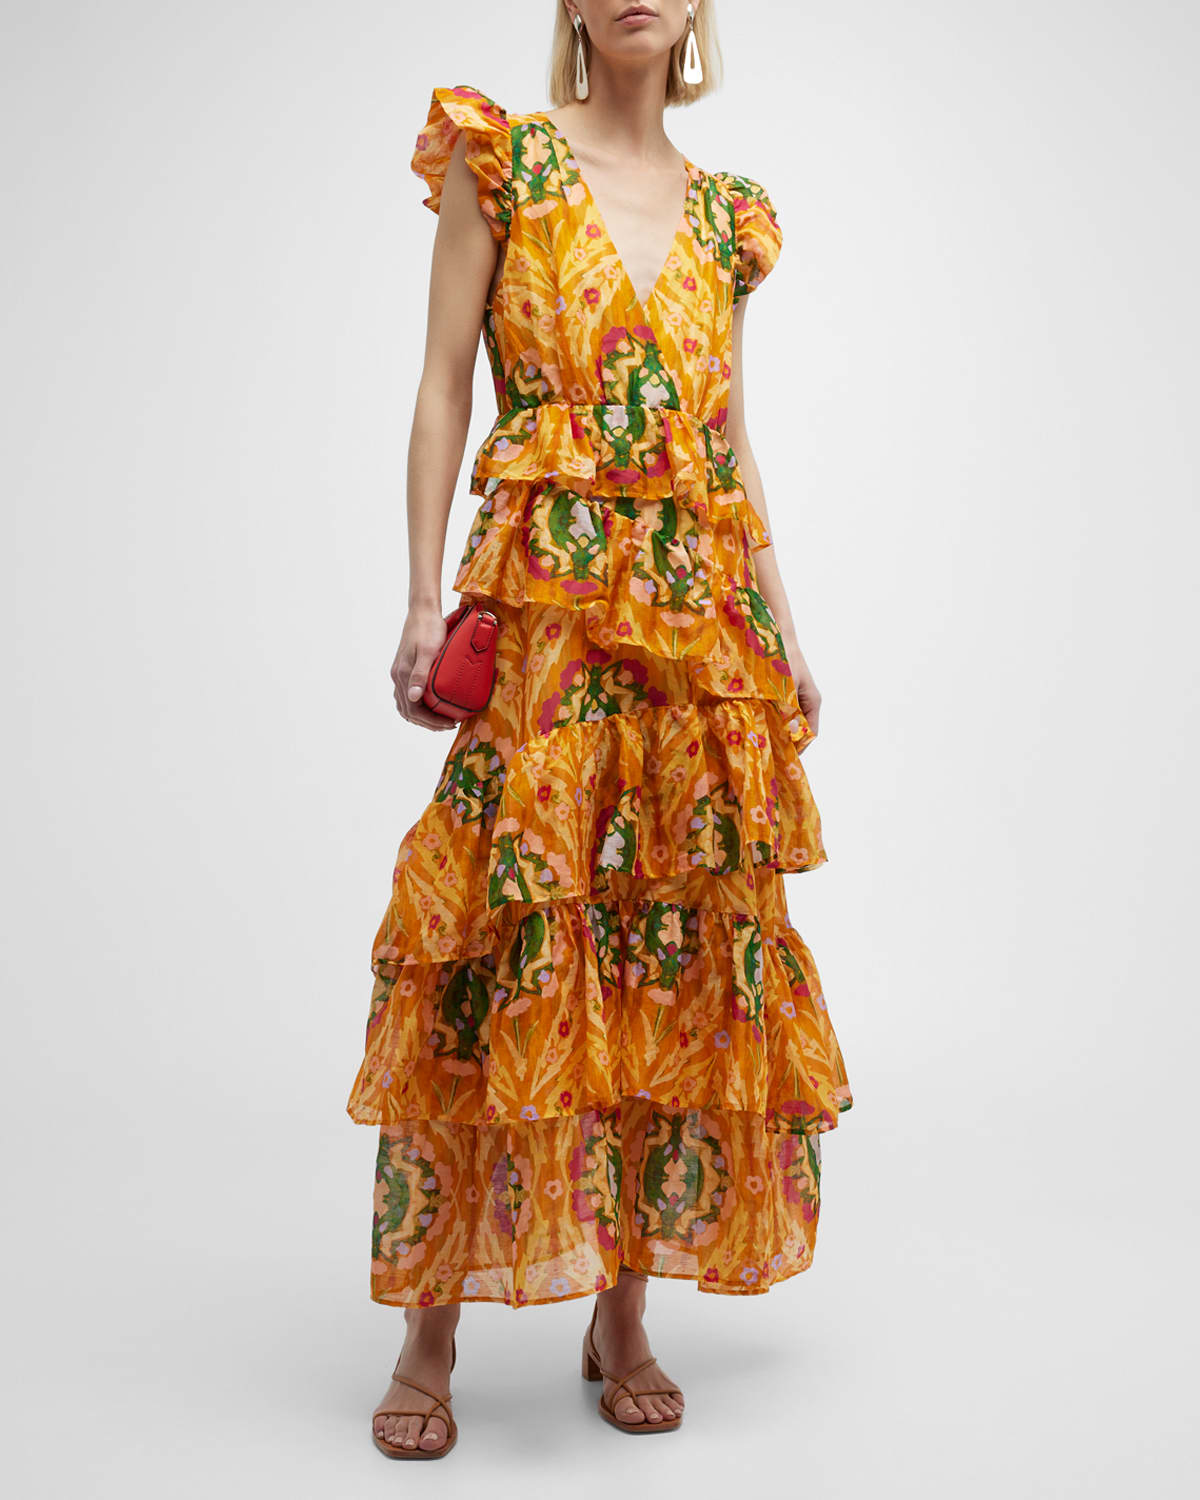 Marie Oliver Marisol Ruffle-Tiered Floral-Print Maxi Dress